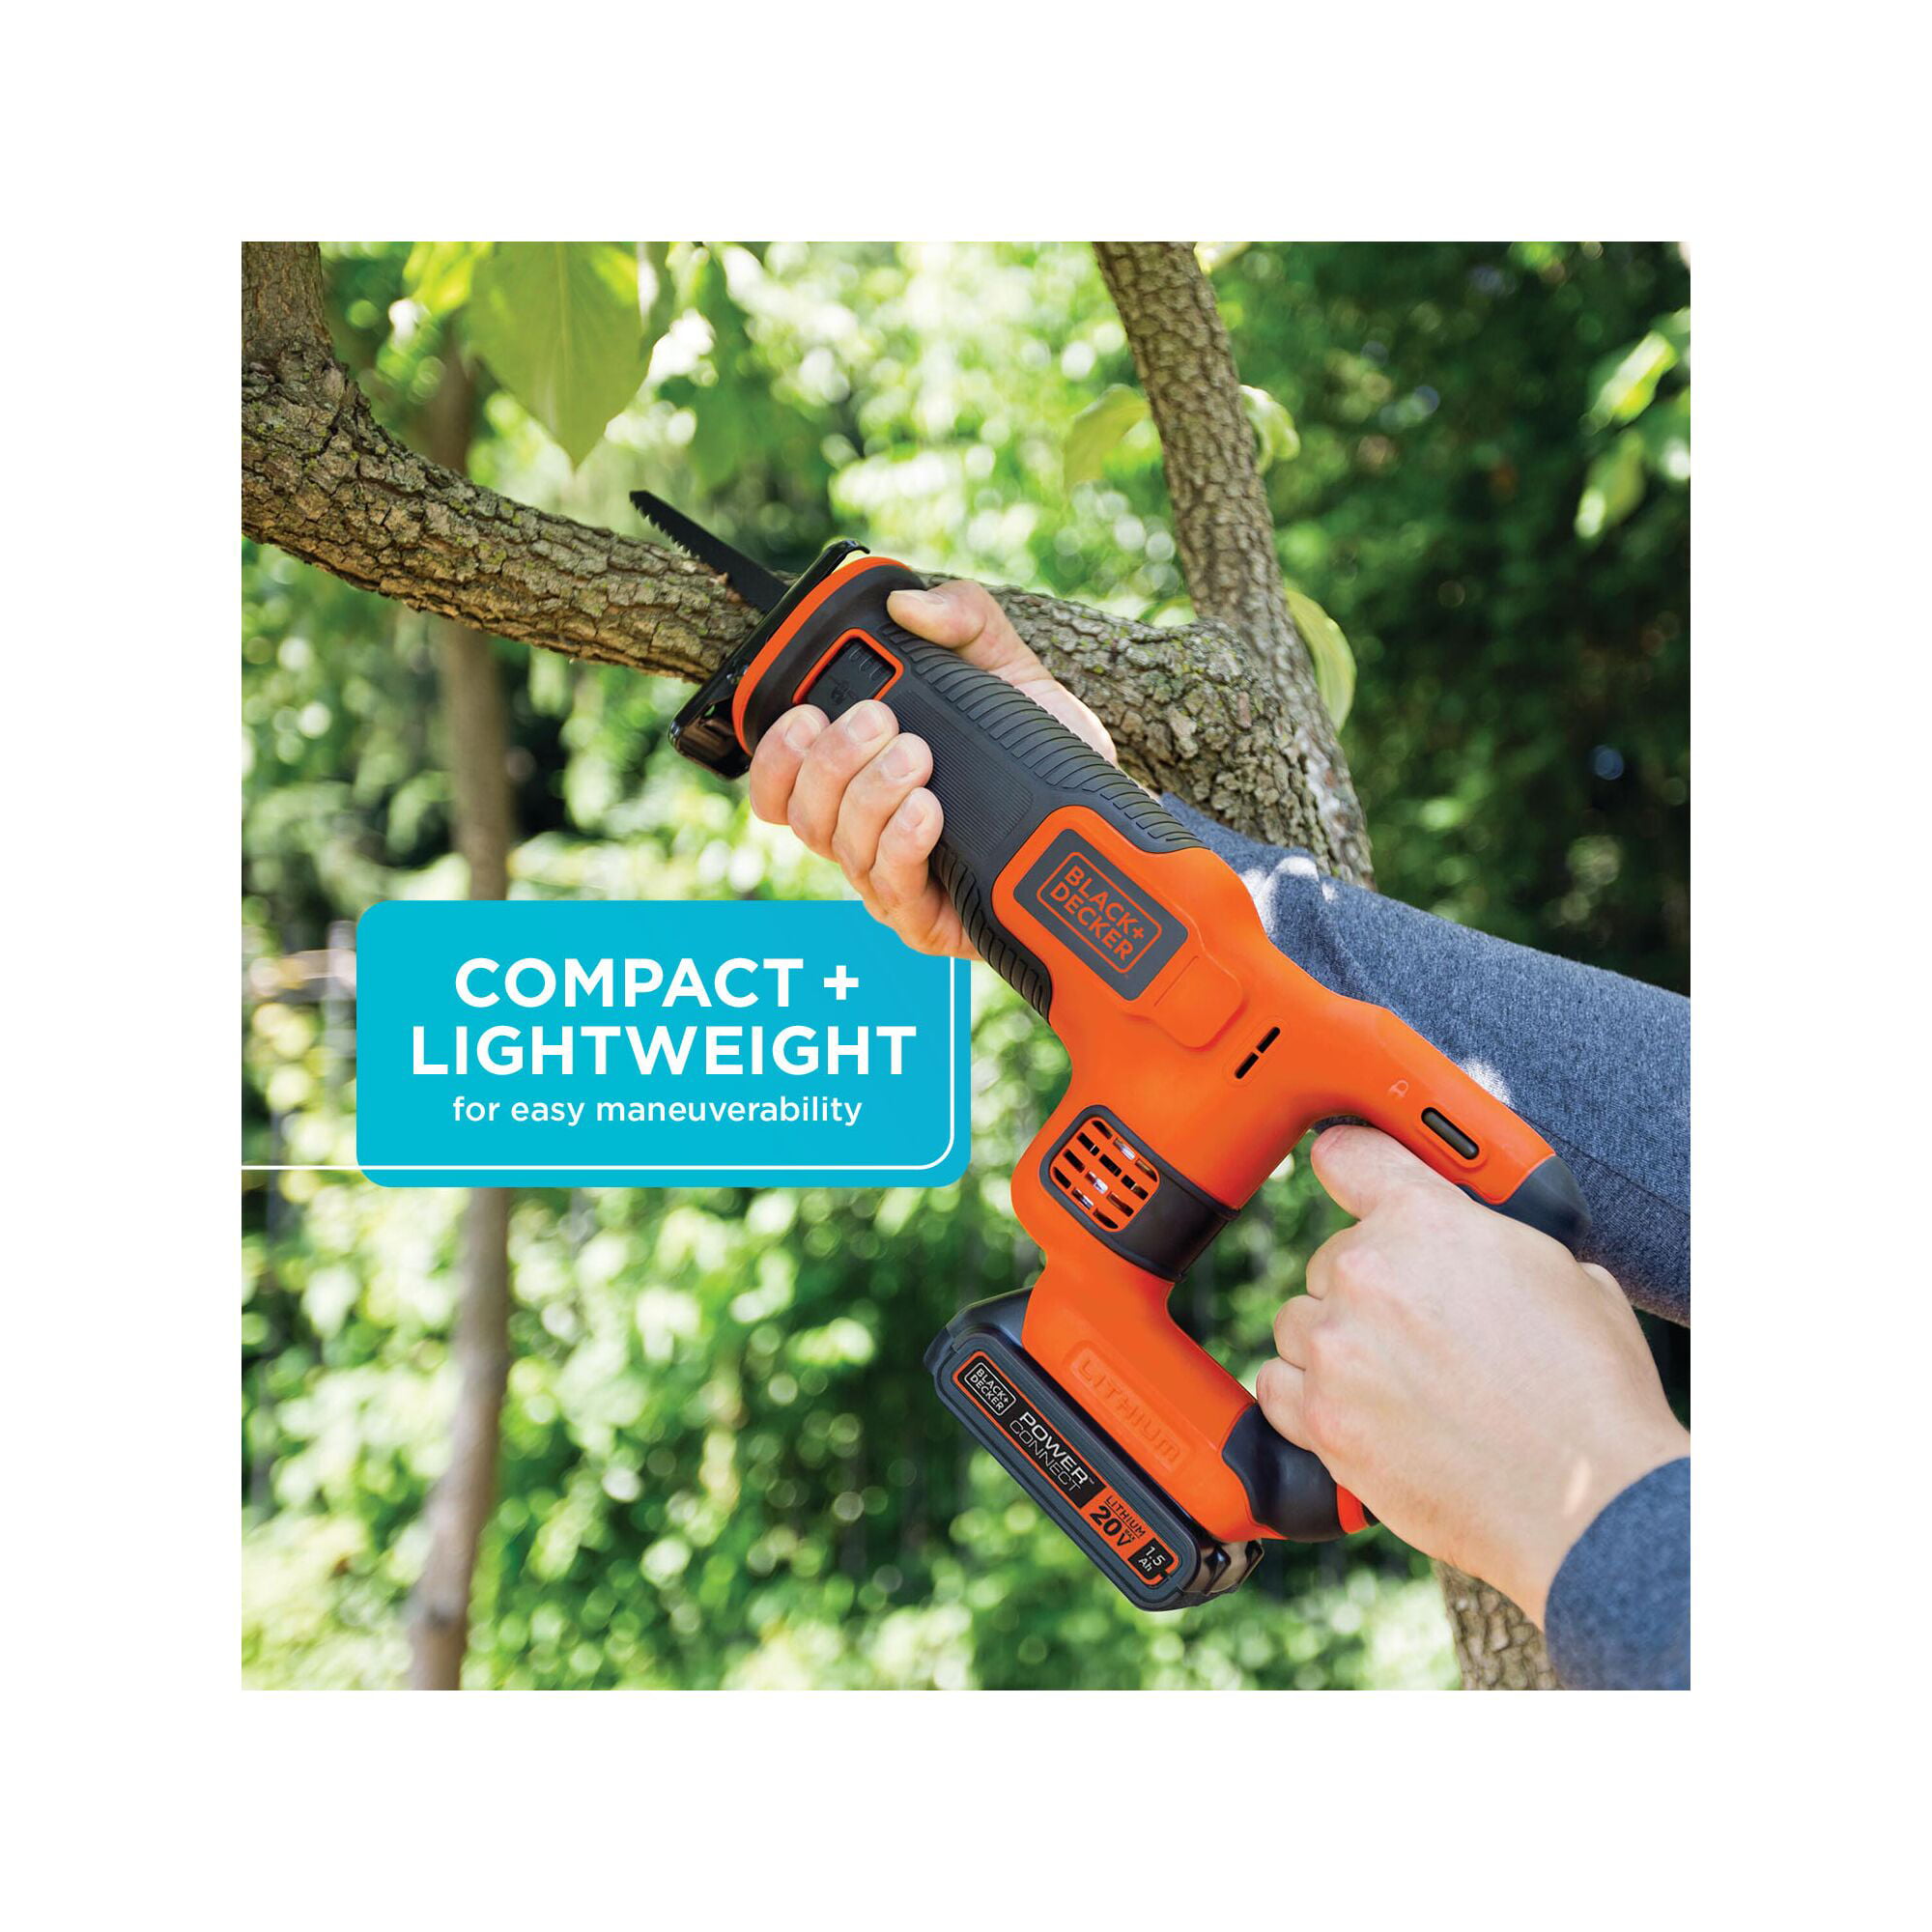 BLACK+DECKER 20V Max Cordless Reciprocating Saw, Battery Included, BDCR20C